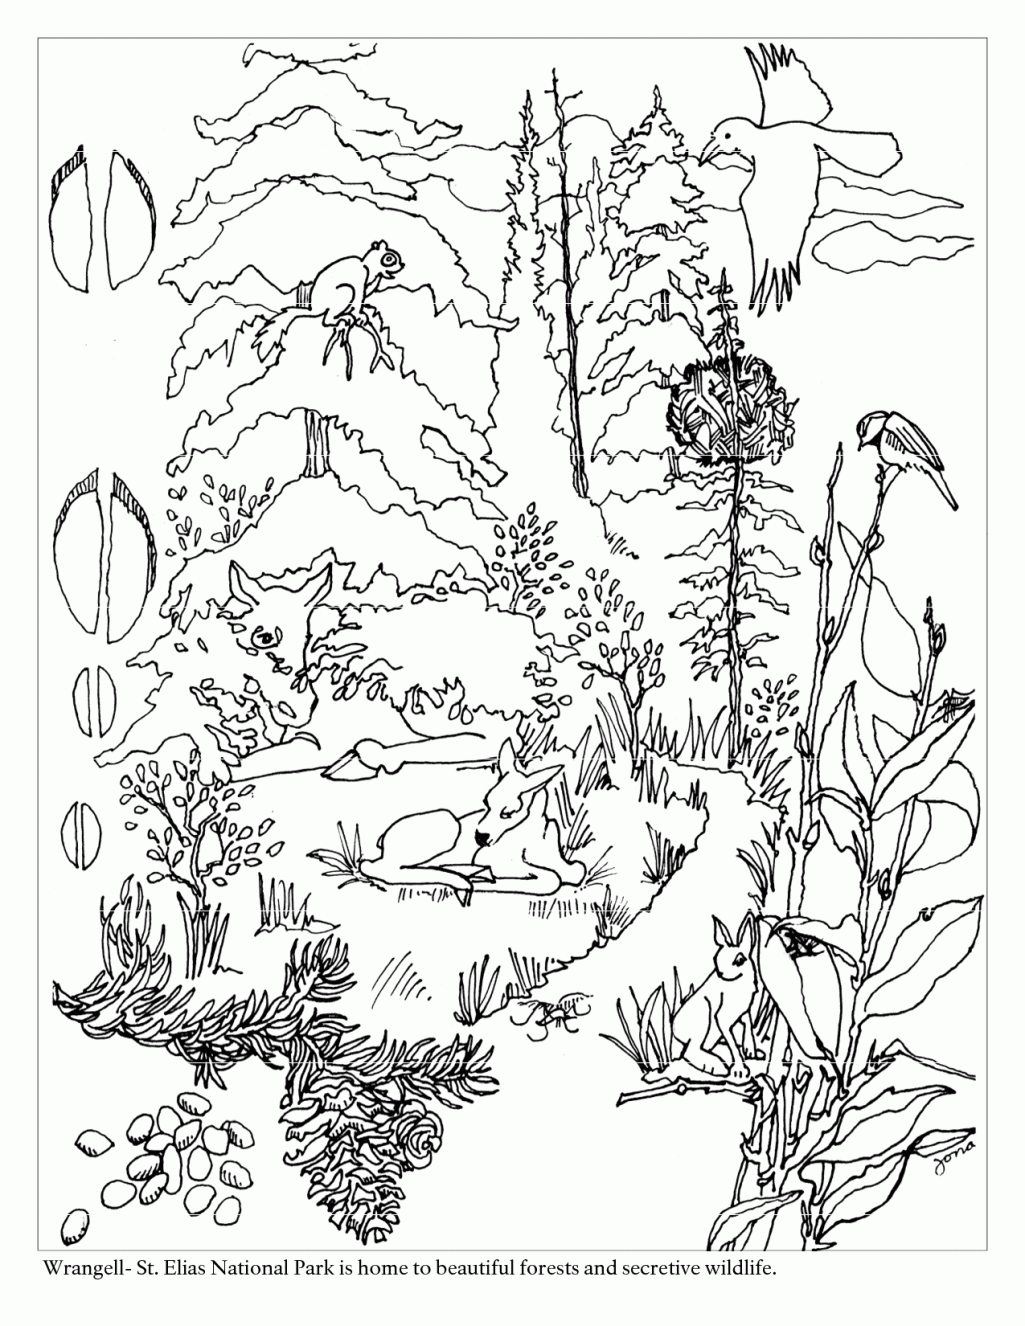 Free Woodland Creature Coloring Pages - Coloring Home